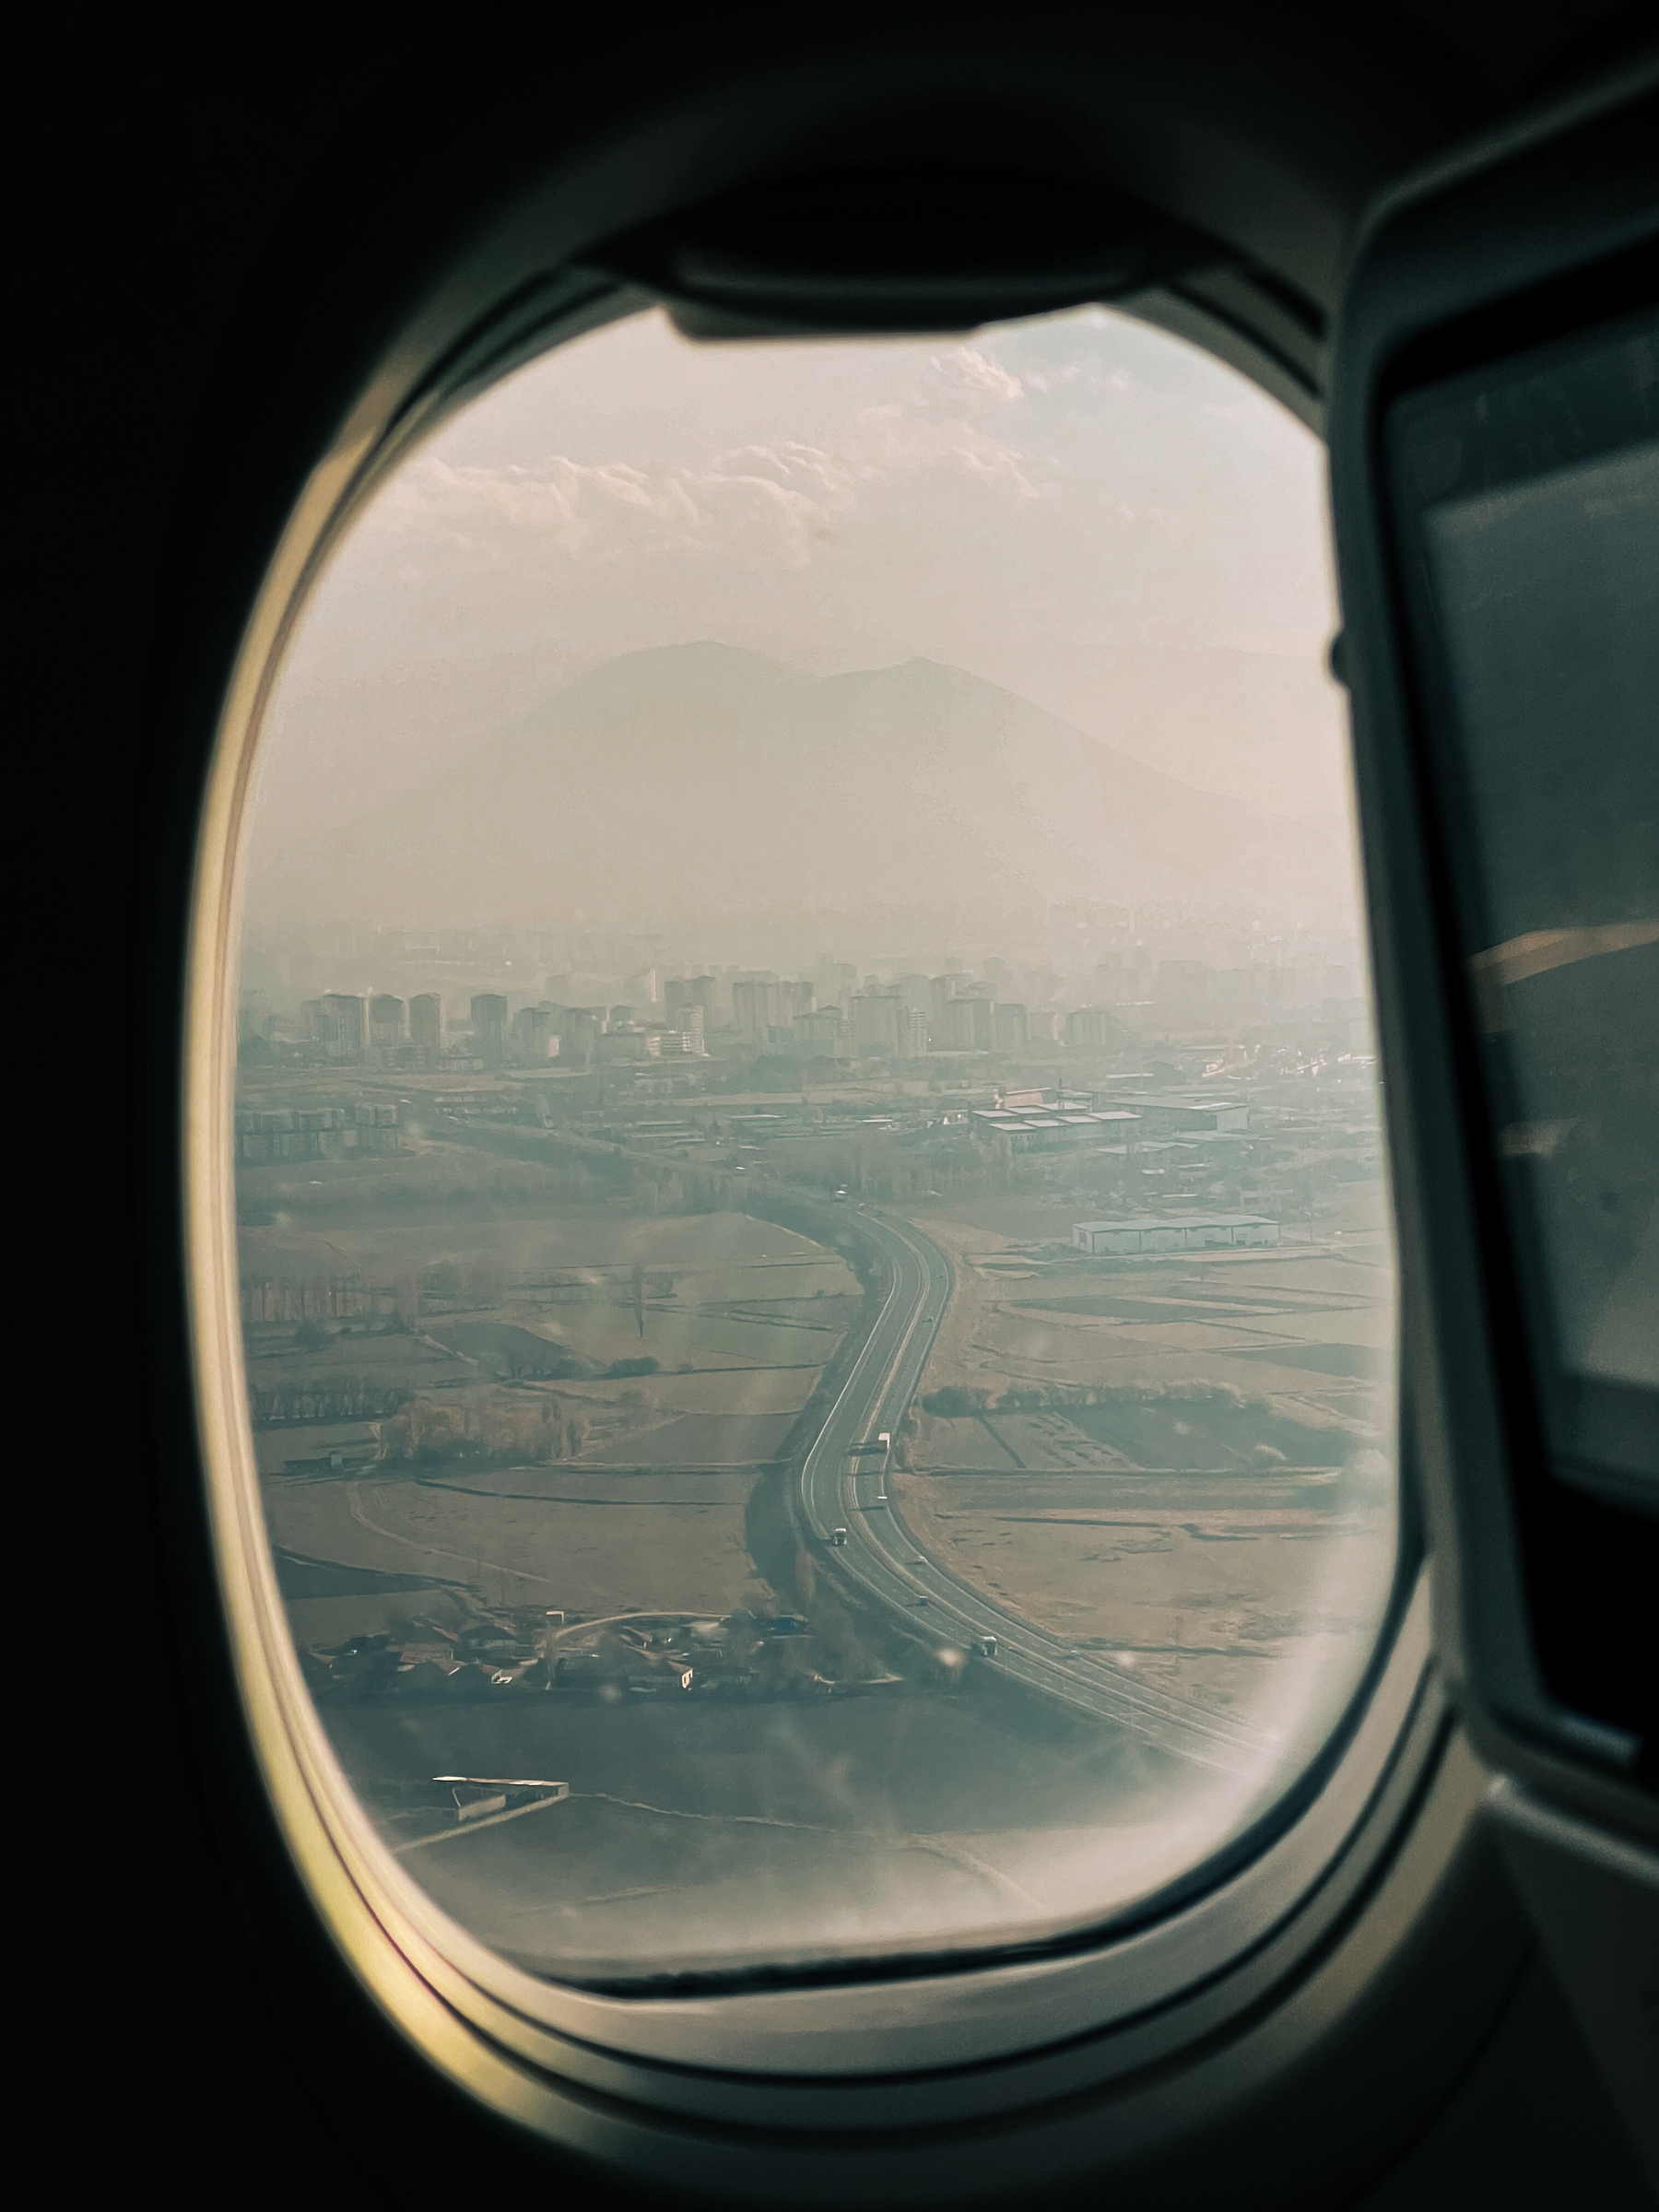 Shot from inside an airplane, as it’s about to land. We can see a road, and a big mountain in the background. 